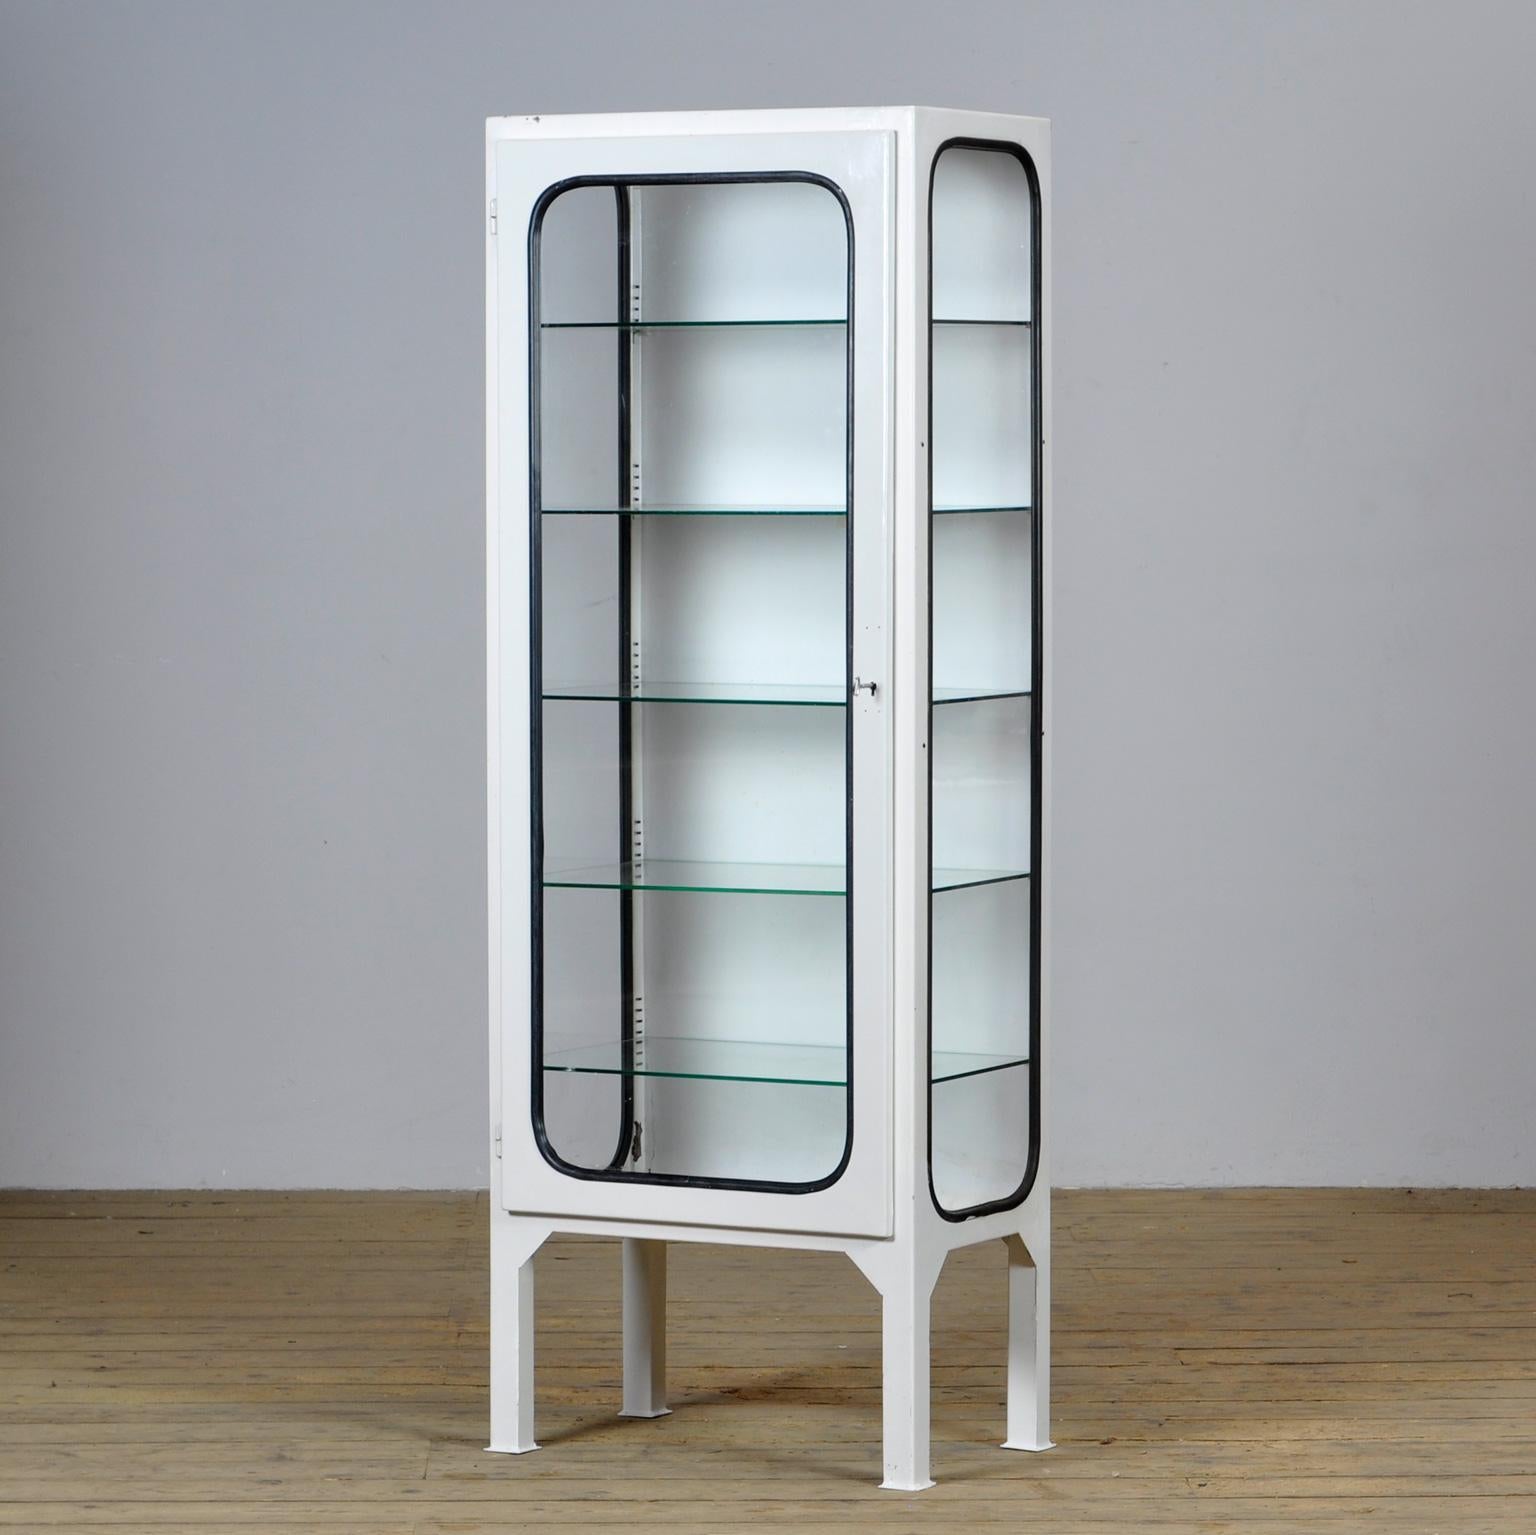 Hungarian Vintage Iron and Glass Medical Cabinet, 1970s